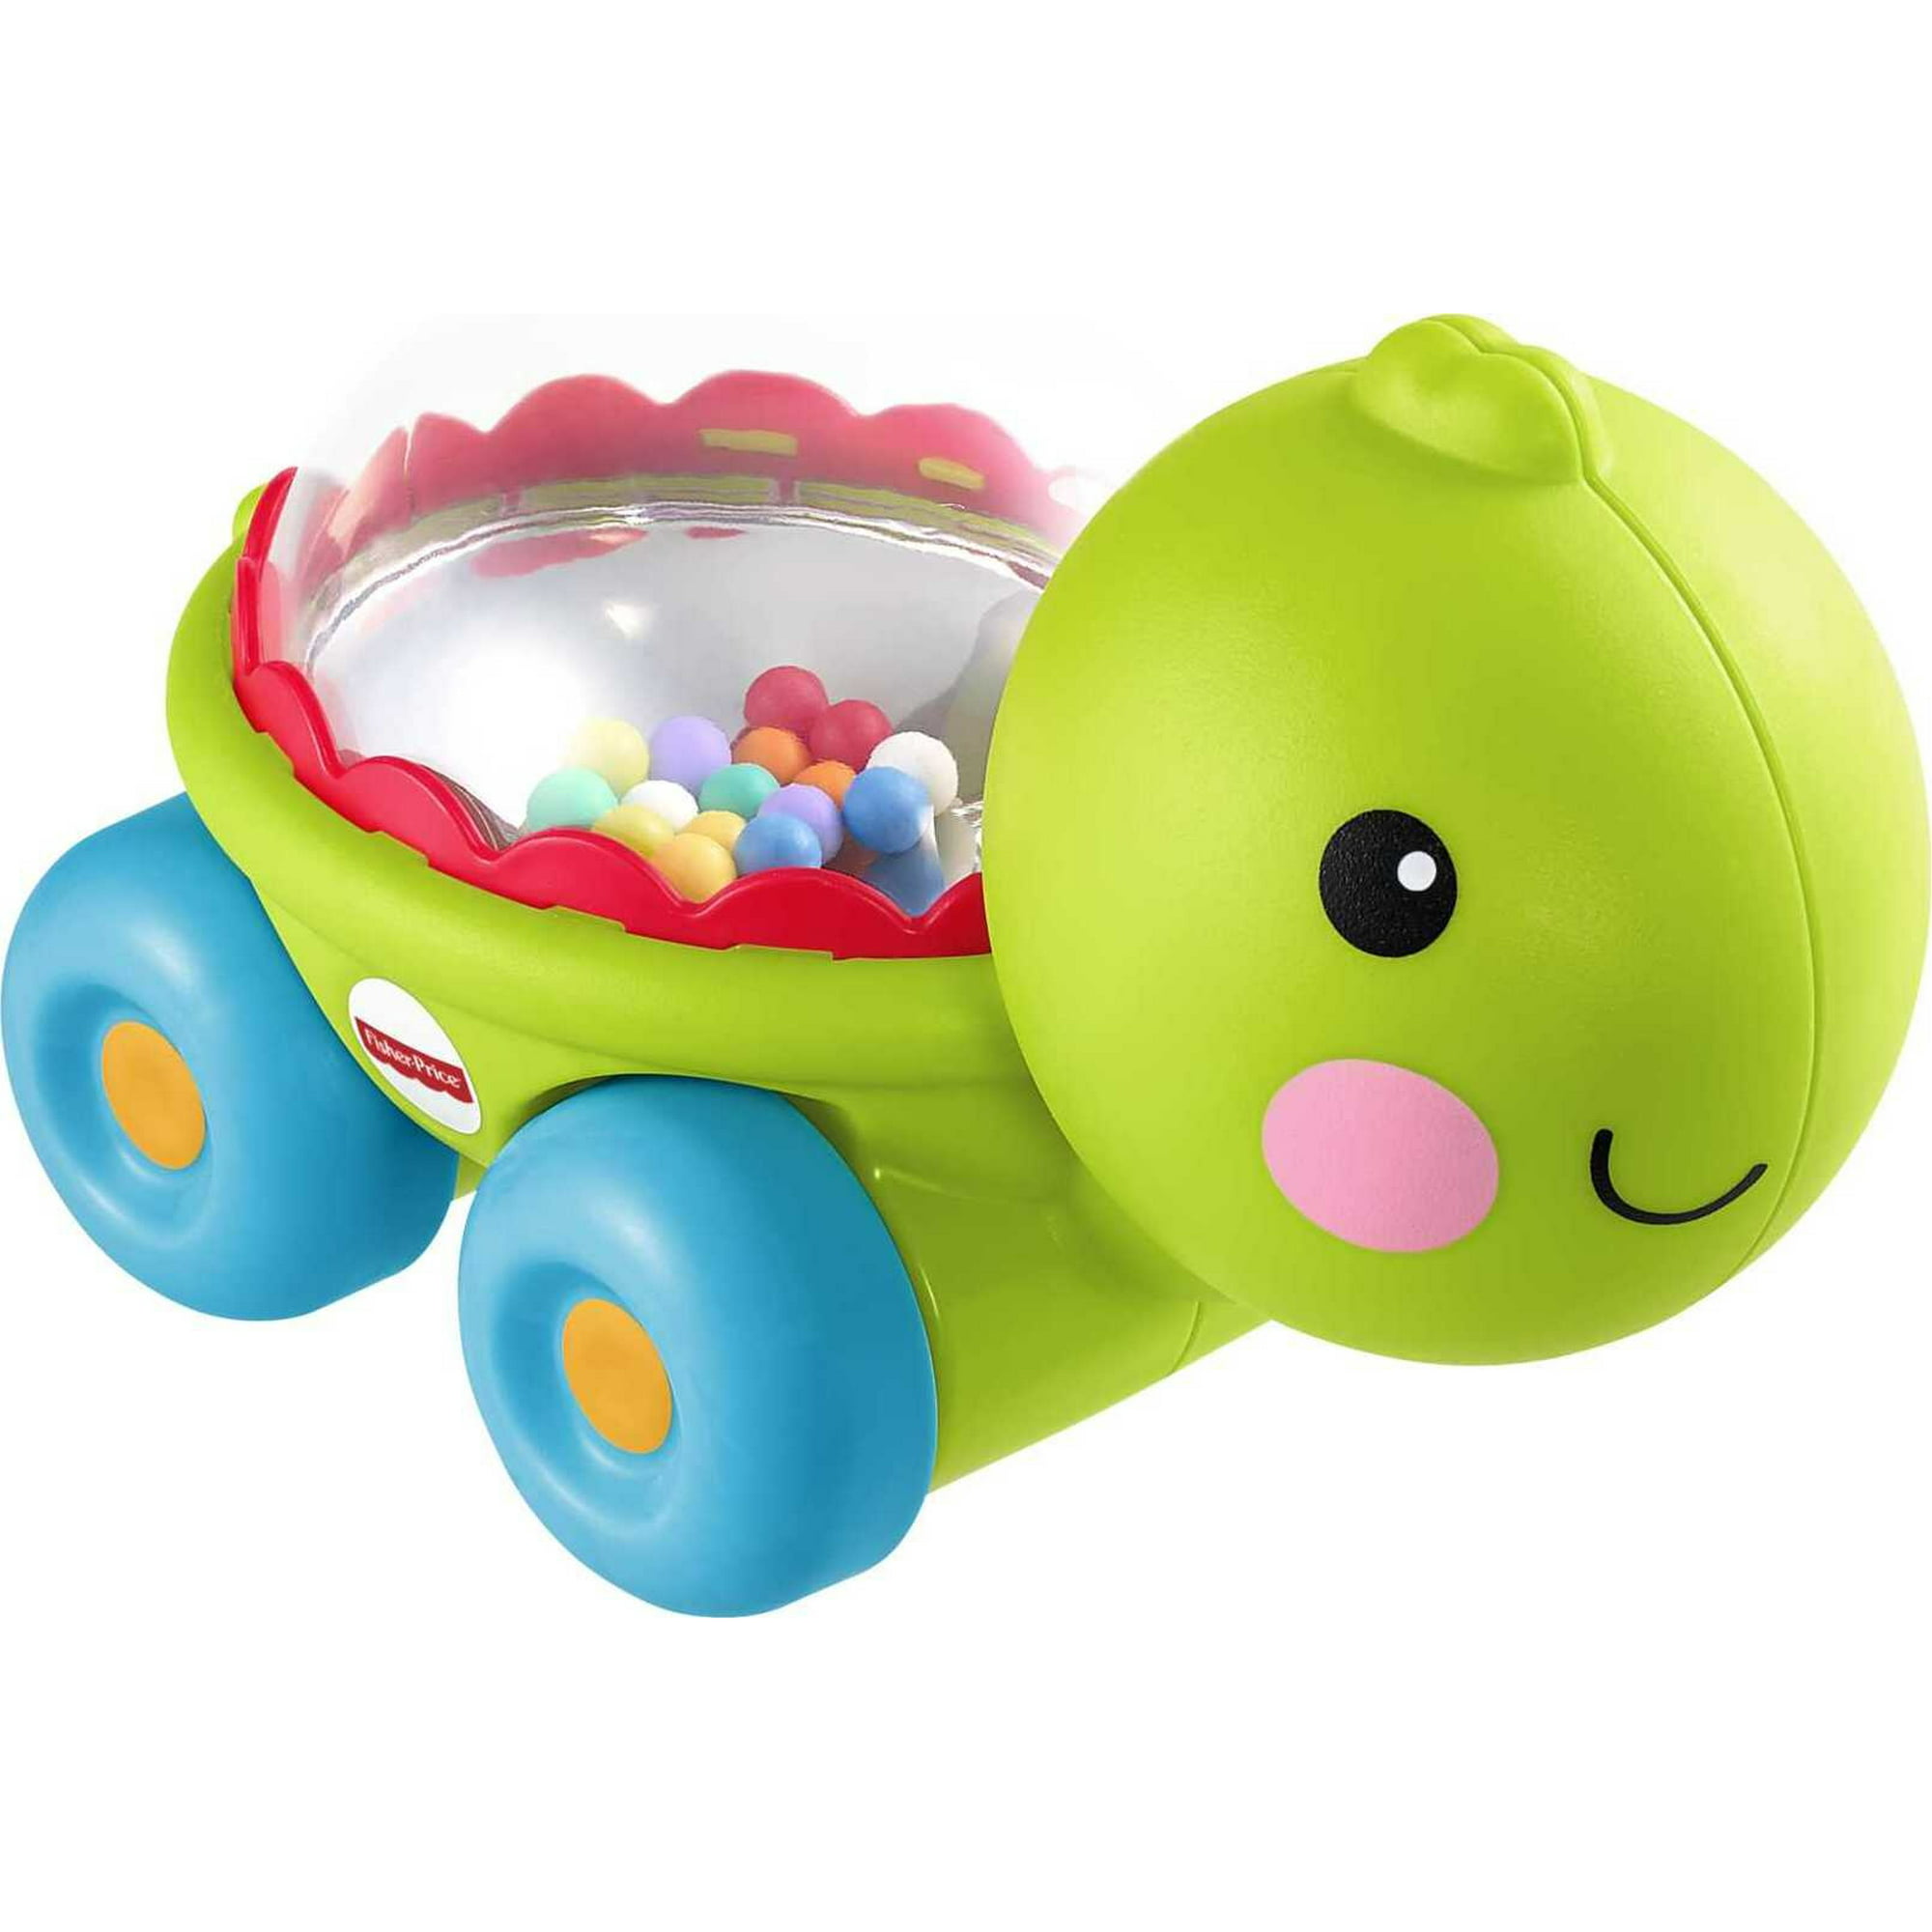 Fisher-Price Poppity Pop Turtle Push-Along Vehicle with Sounds for Infant Crawling Play